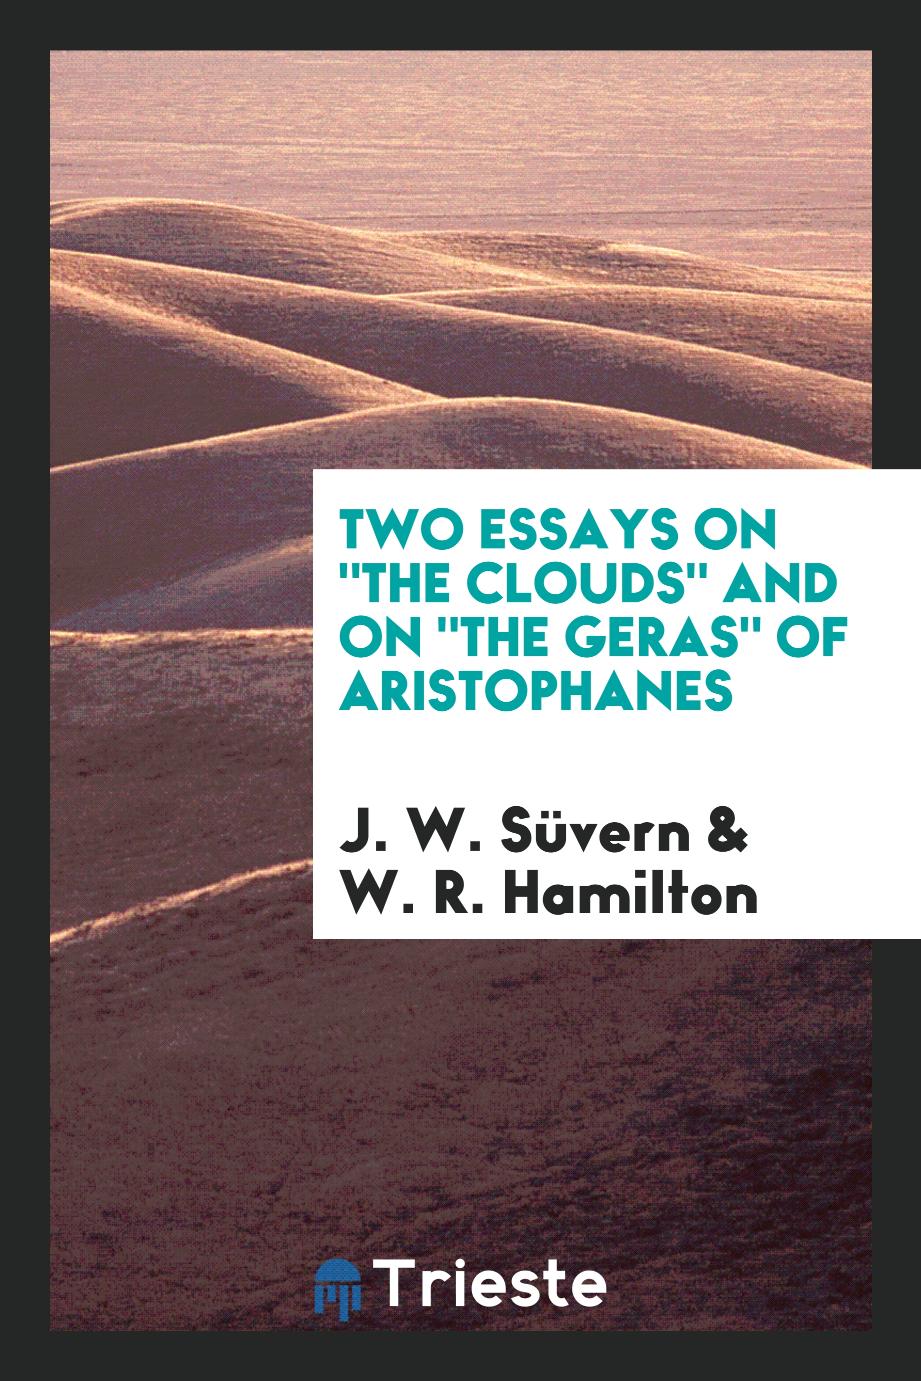 Two Essays on "The Clouds" and on "The Geras" of Aristophanes